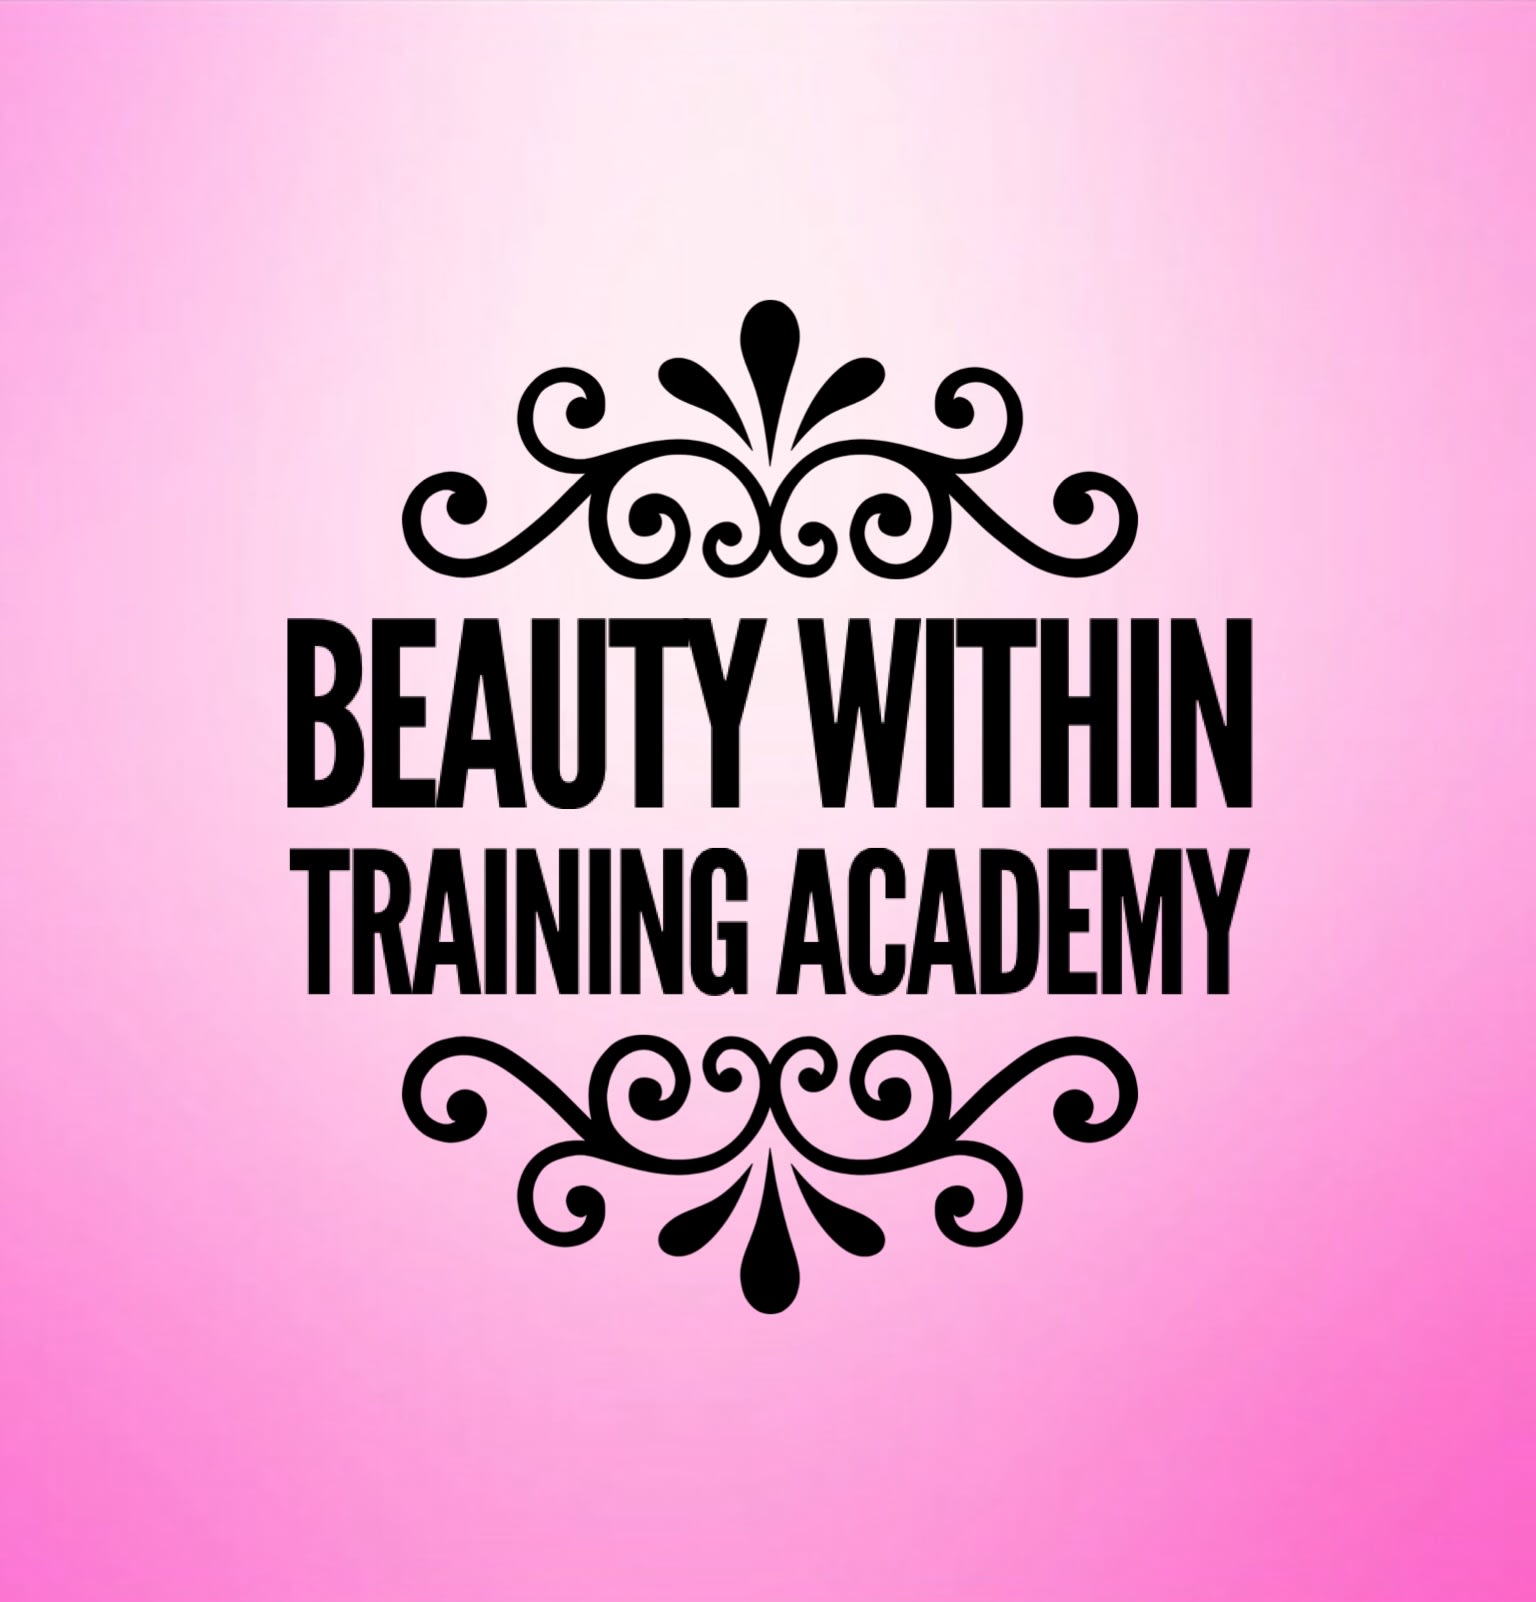 Beauty Within Training Academy